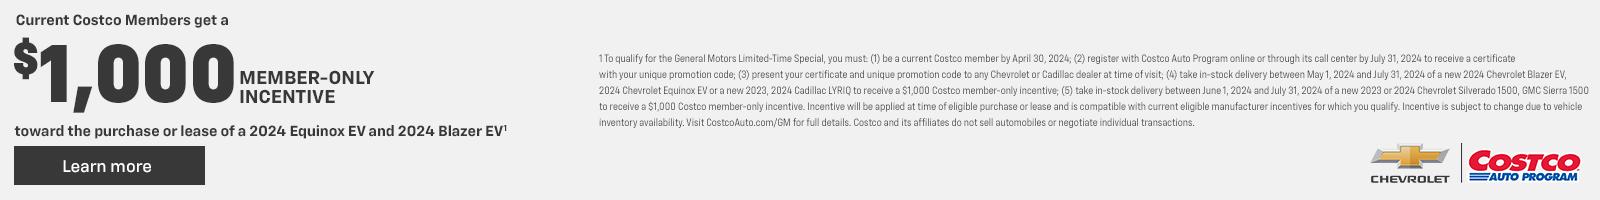 2024 Chevy Equinox EV. 2024 Chevy Blazer EV. Current Costco members get a $1,000 member-only incentive toward the purchase or lease of a 2024 Equinox EV and Blazer EV.